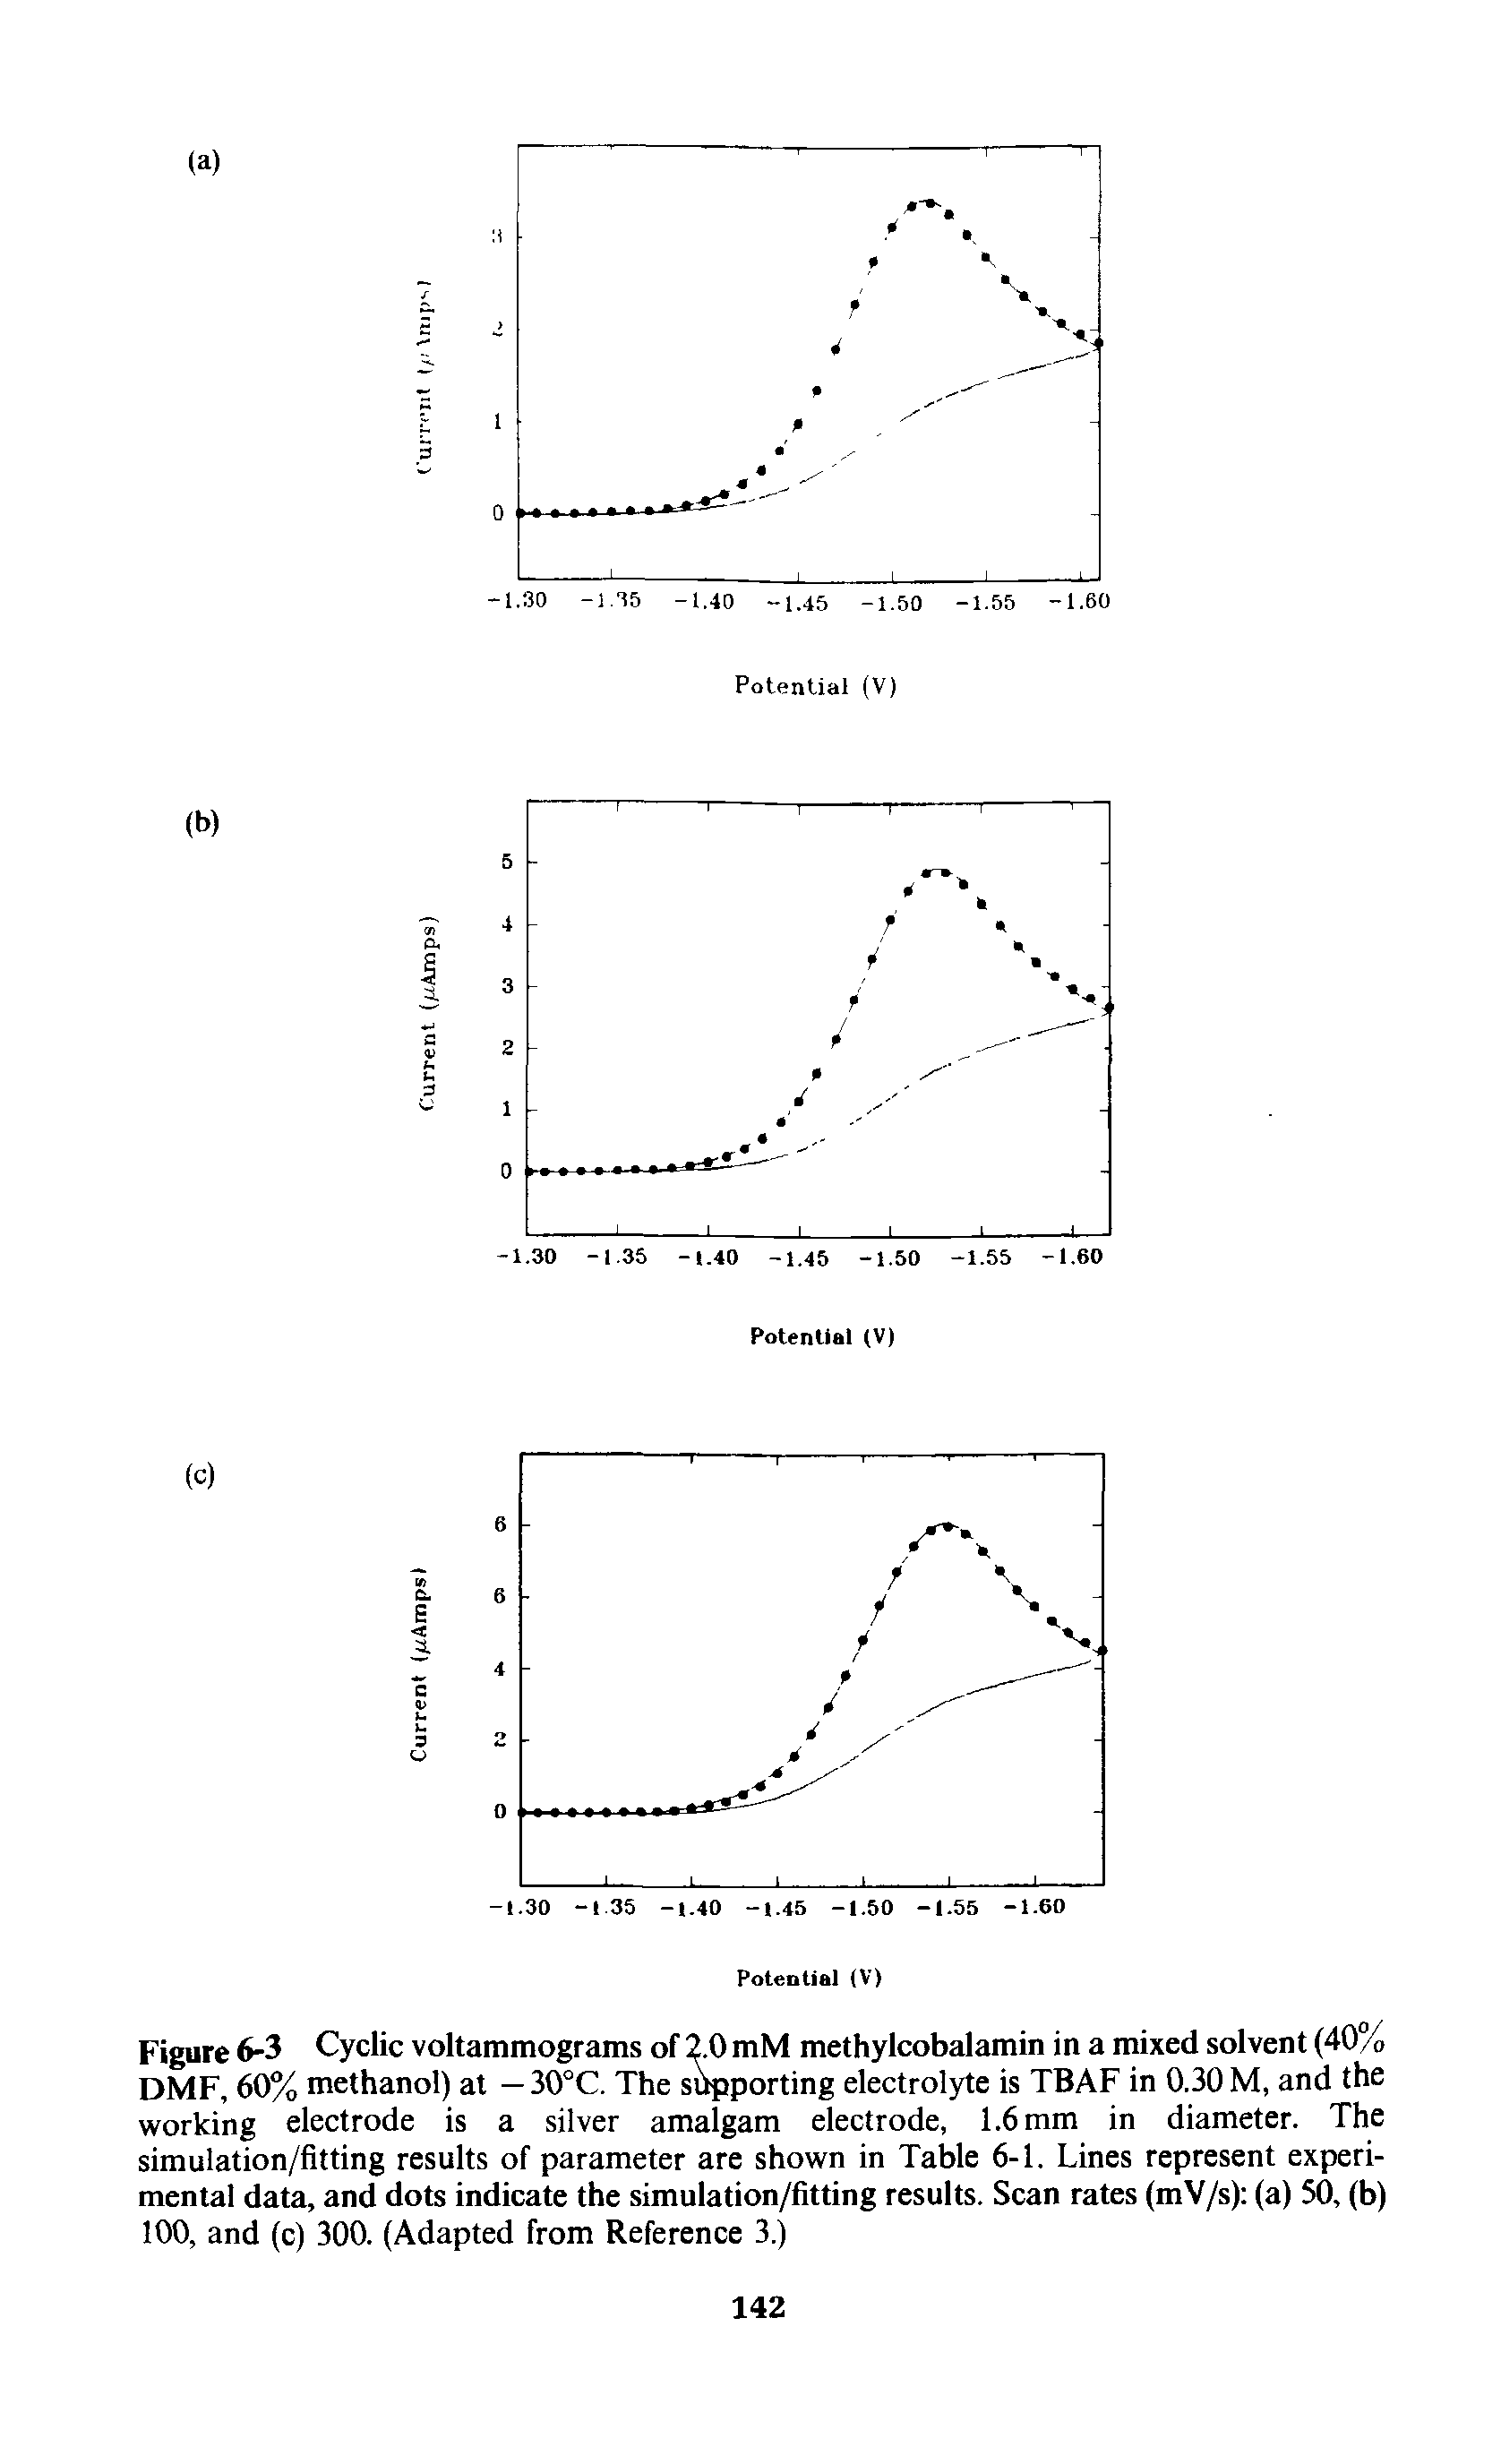 Figure 6-3 Cyclic voltammograms of 2.0 mM methylcobalamin in a mixed solvent (40% DMF, 60% methanol) at — 30°C. The s porting electrolyte is TBAF in 0.30 M, and the working electrode is a silver amalgam electrode, 1.6 mm in diameter. The simulation/fitting results of parameter are shown in Table 6-1. Lines represent experimental data, and dots indicate the simulation/fitting results. Scan rates (mV/s) (a) 50, (b) 100, and (c) 300. (Adapted from Reference 3.)...